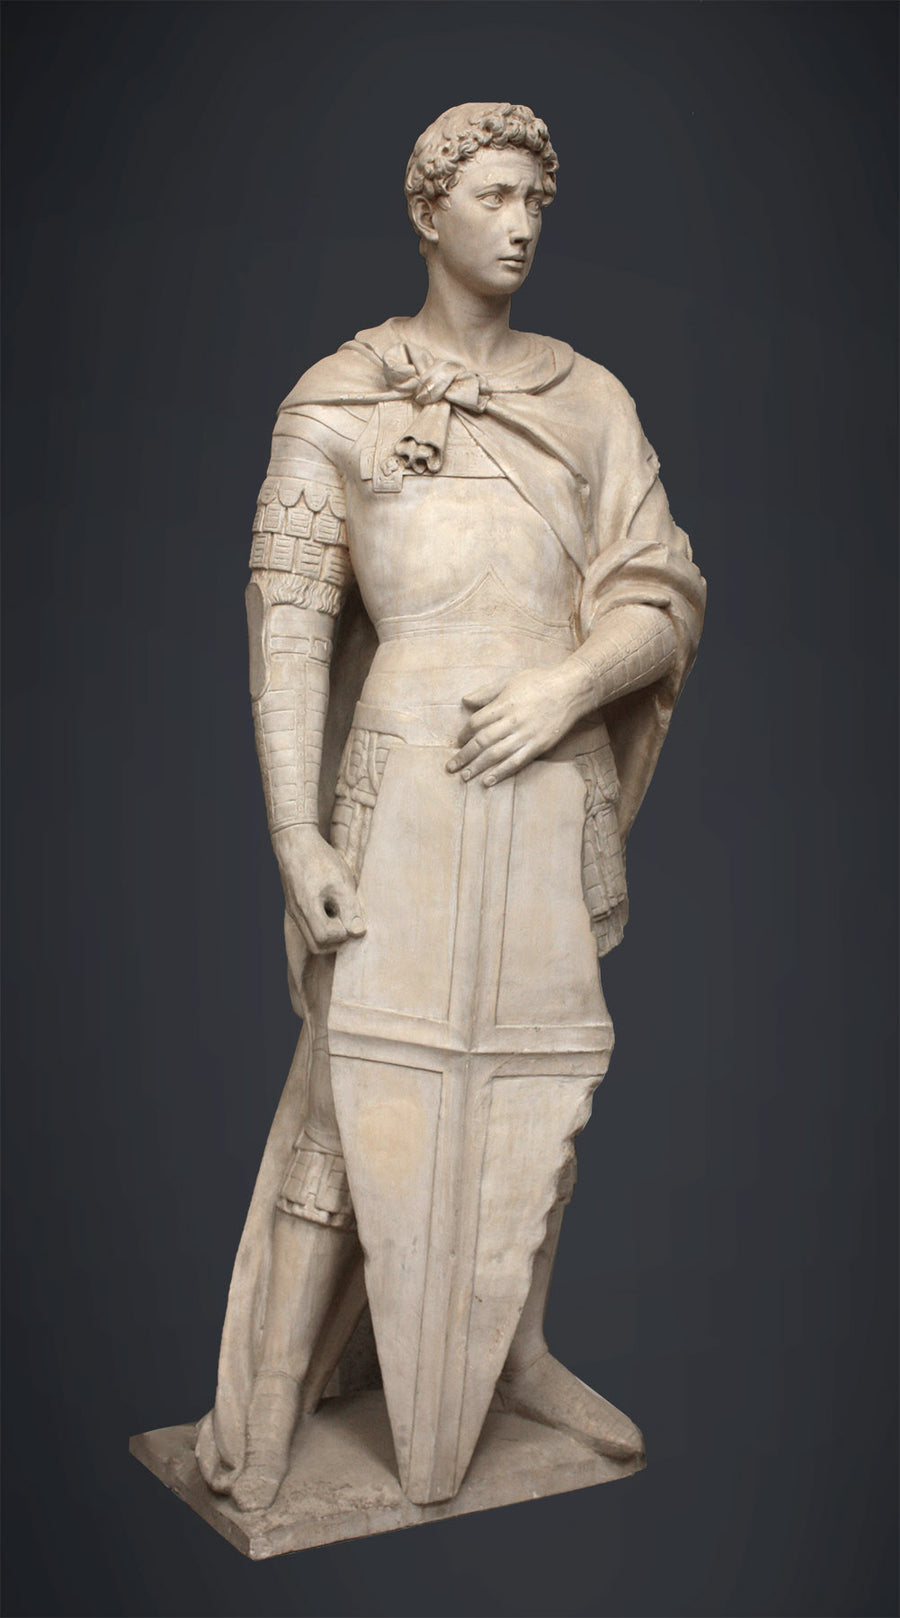 photo of plaster cast sculpture of male figure, namely Saint George, standing in armor and resting shield in front, on dark gray background